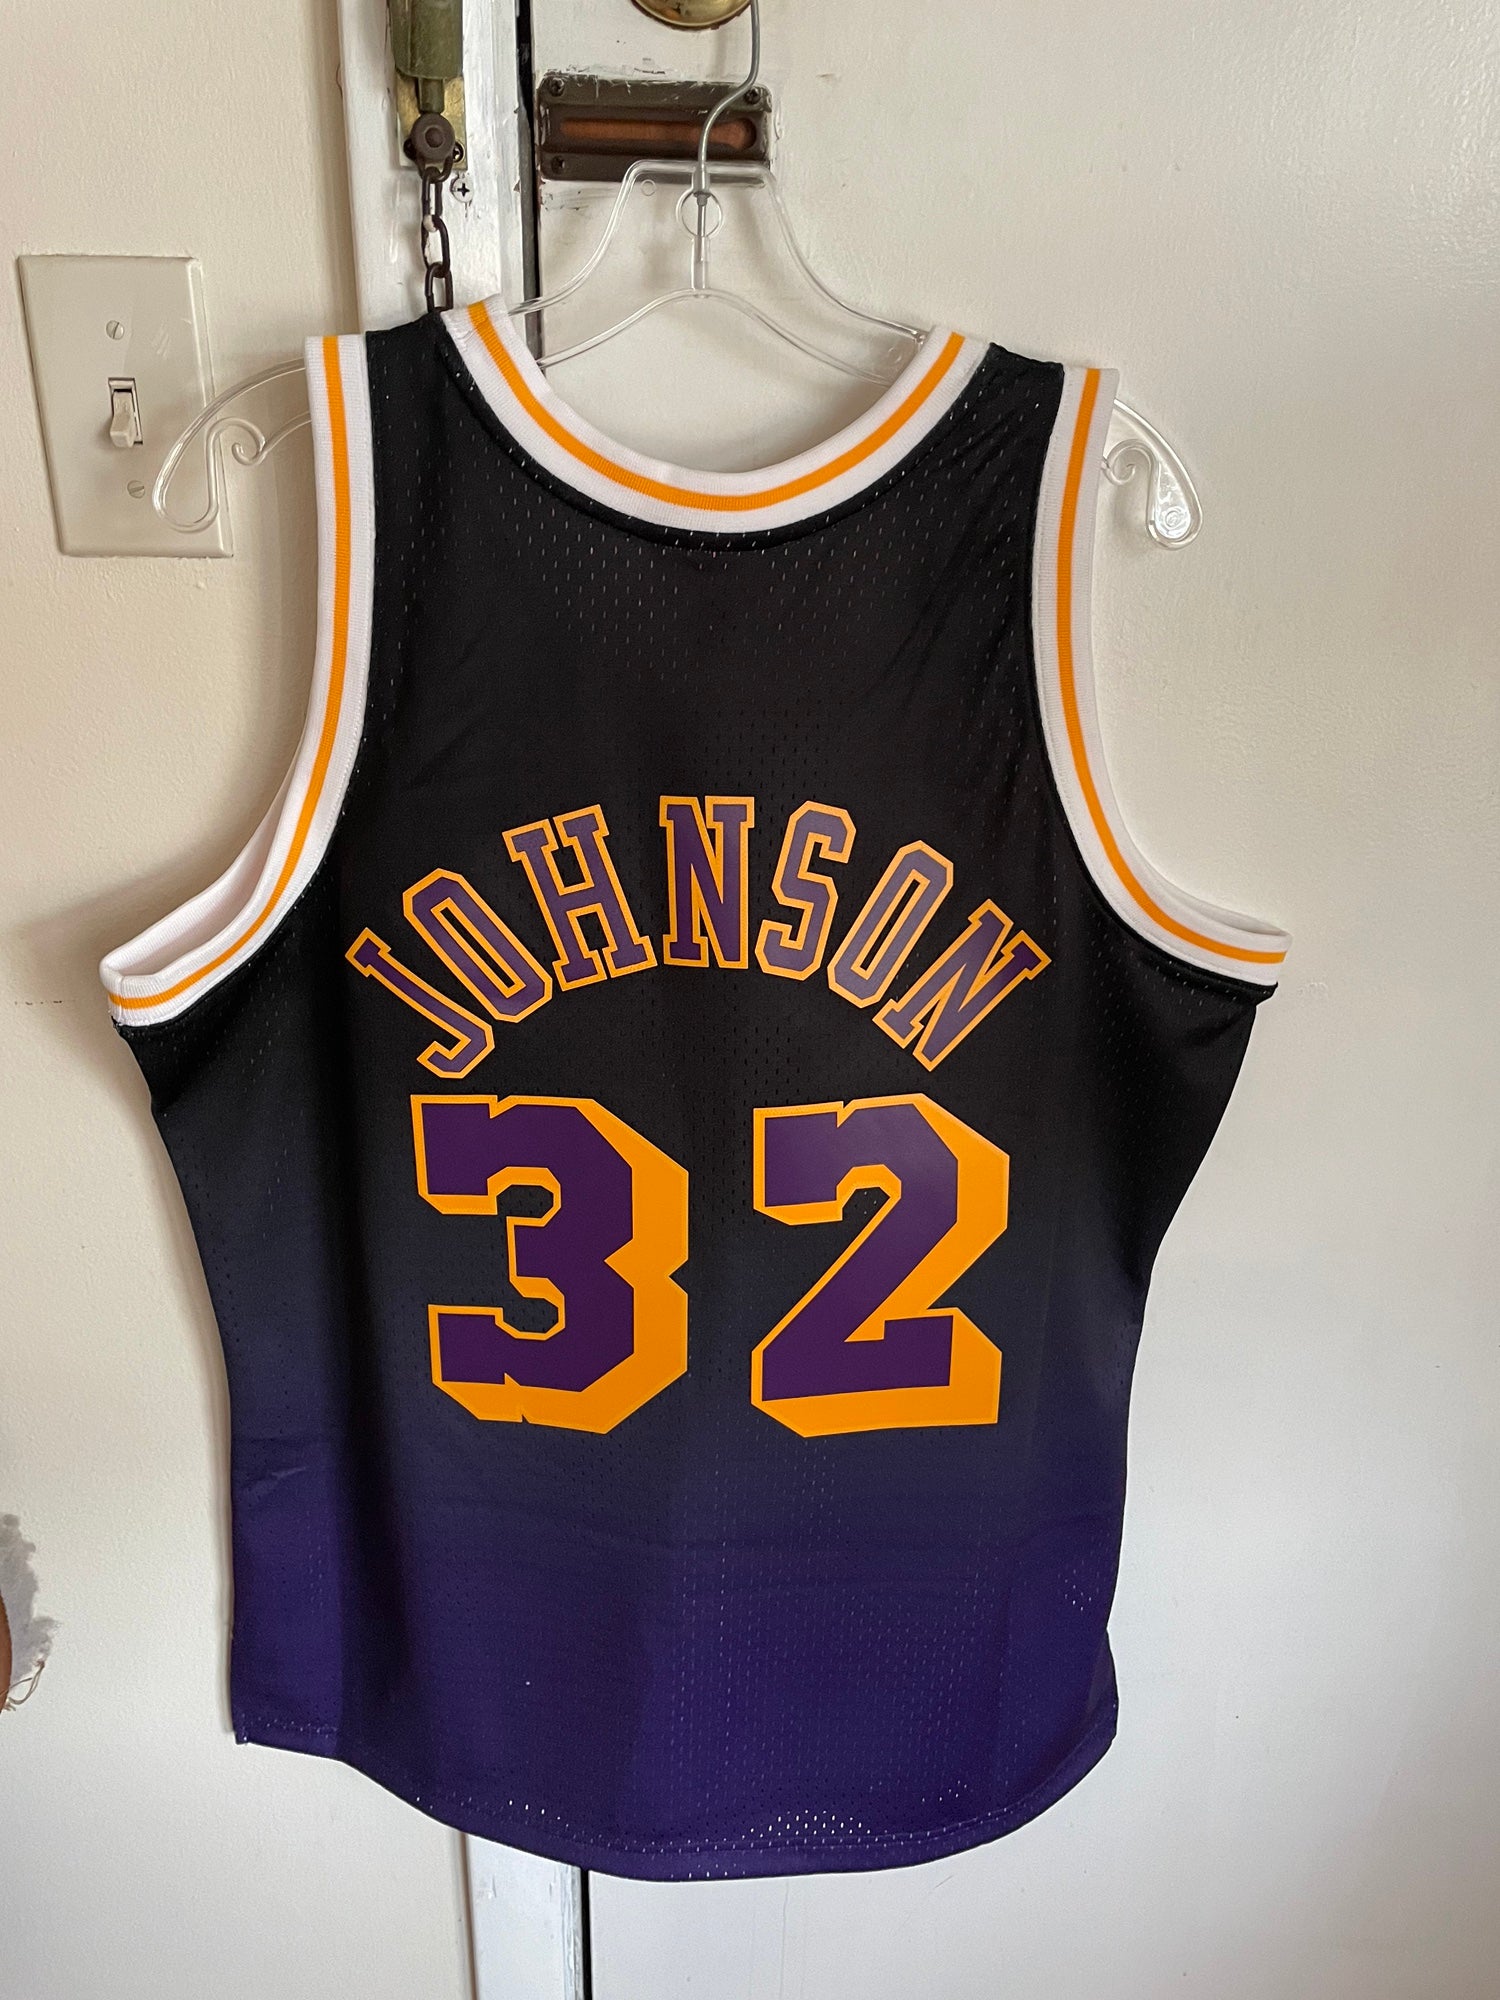 New Los Angeles Lakers Magic Johnson # 32 Jersey U for Sale in